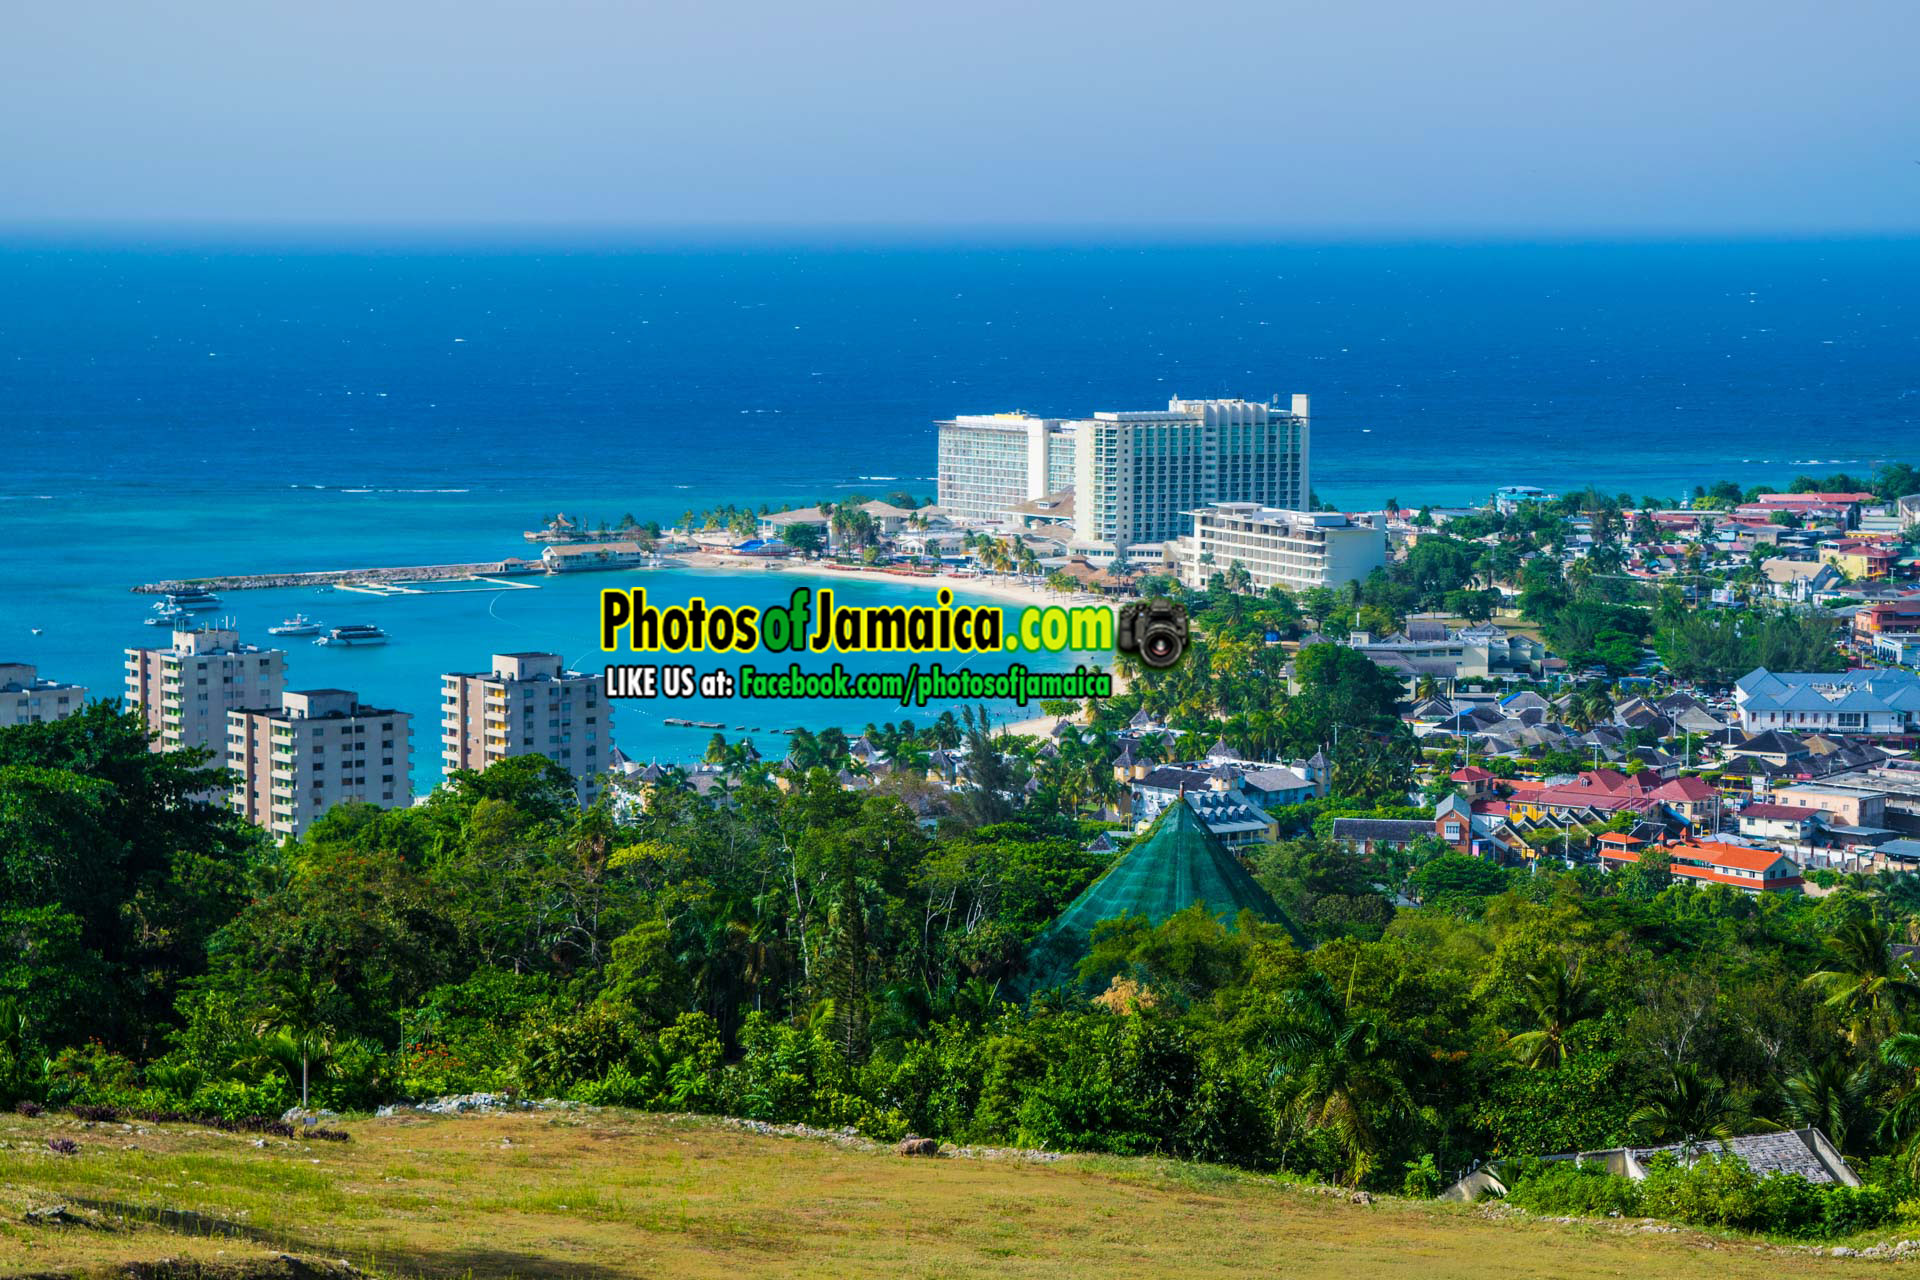 5 Reasons Why Jamaica is One of the Best Caribbean Destinations to Visit | The ...1920 x 1280